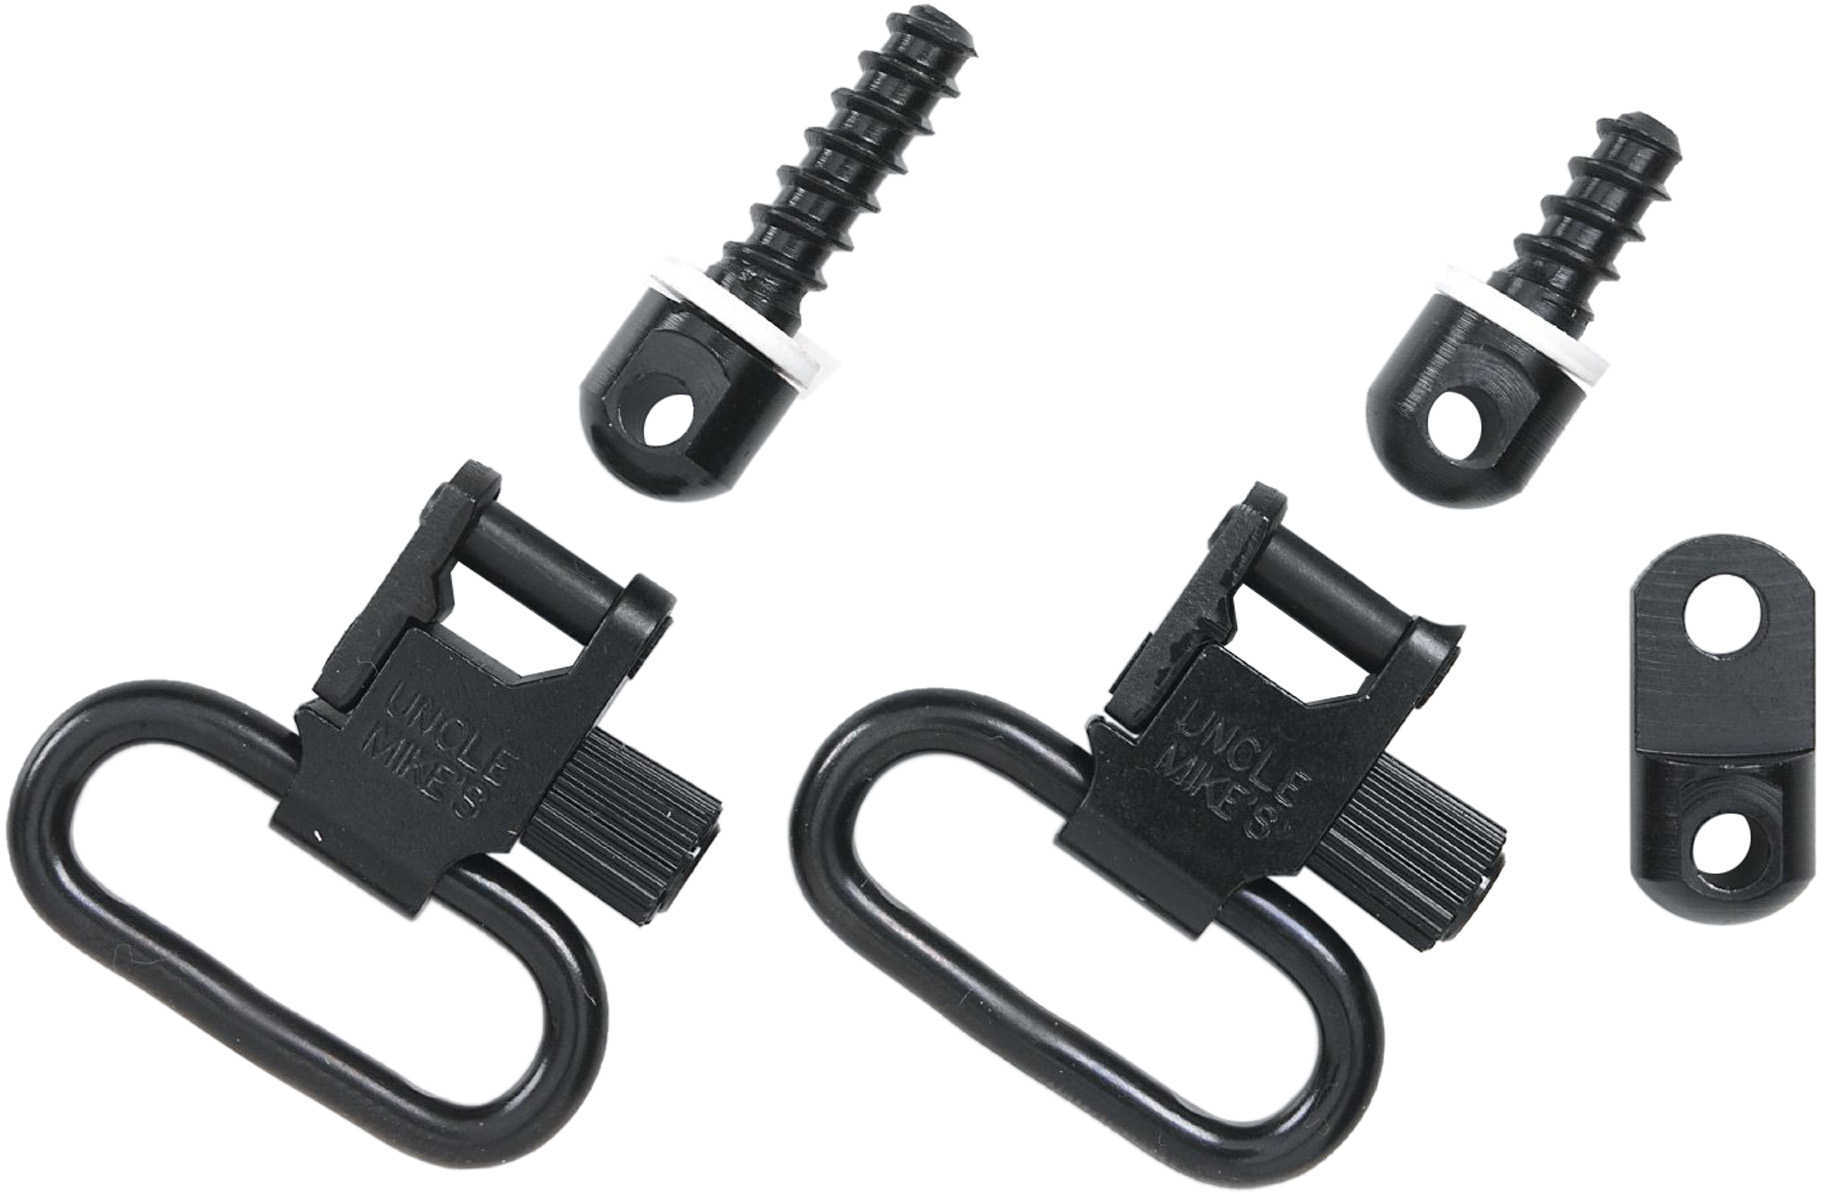 Uncle Mikes 1" Quick Detach Sling Swivels For Ruger® Auto/Single Shot Carbines Md: 14612